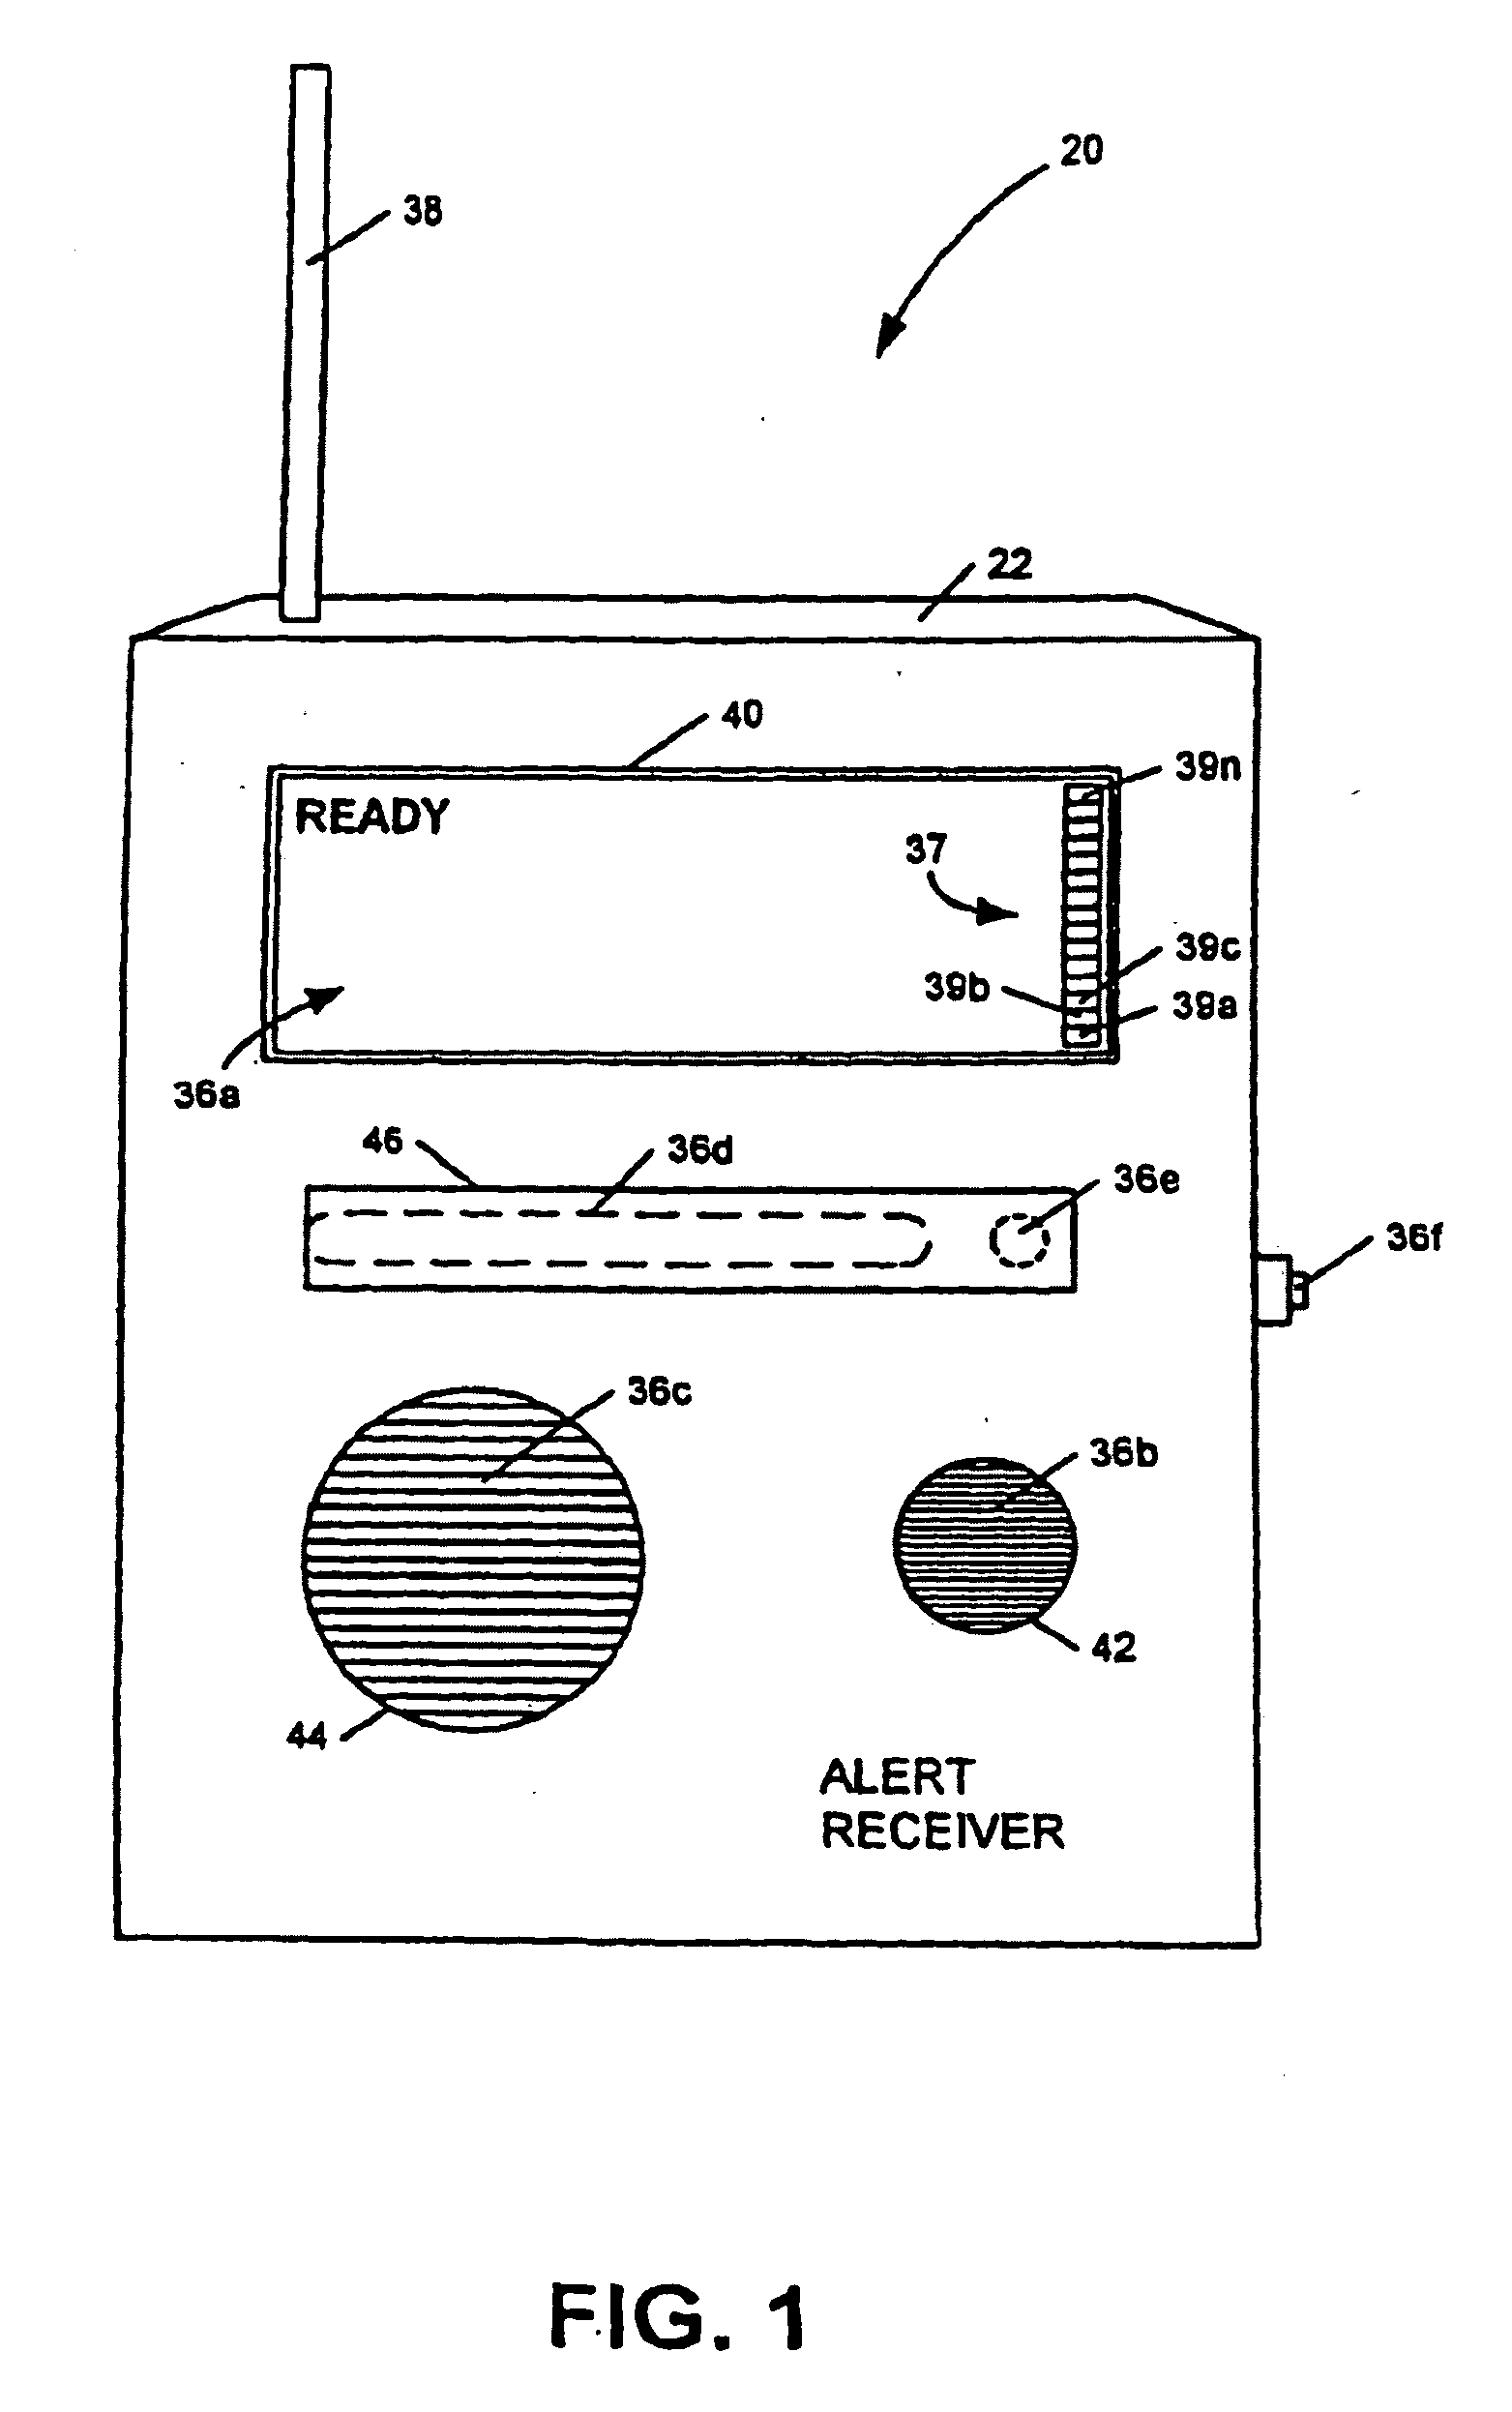 Apparatus and Method for Providing Weather and Other Alerts